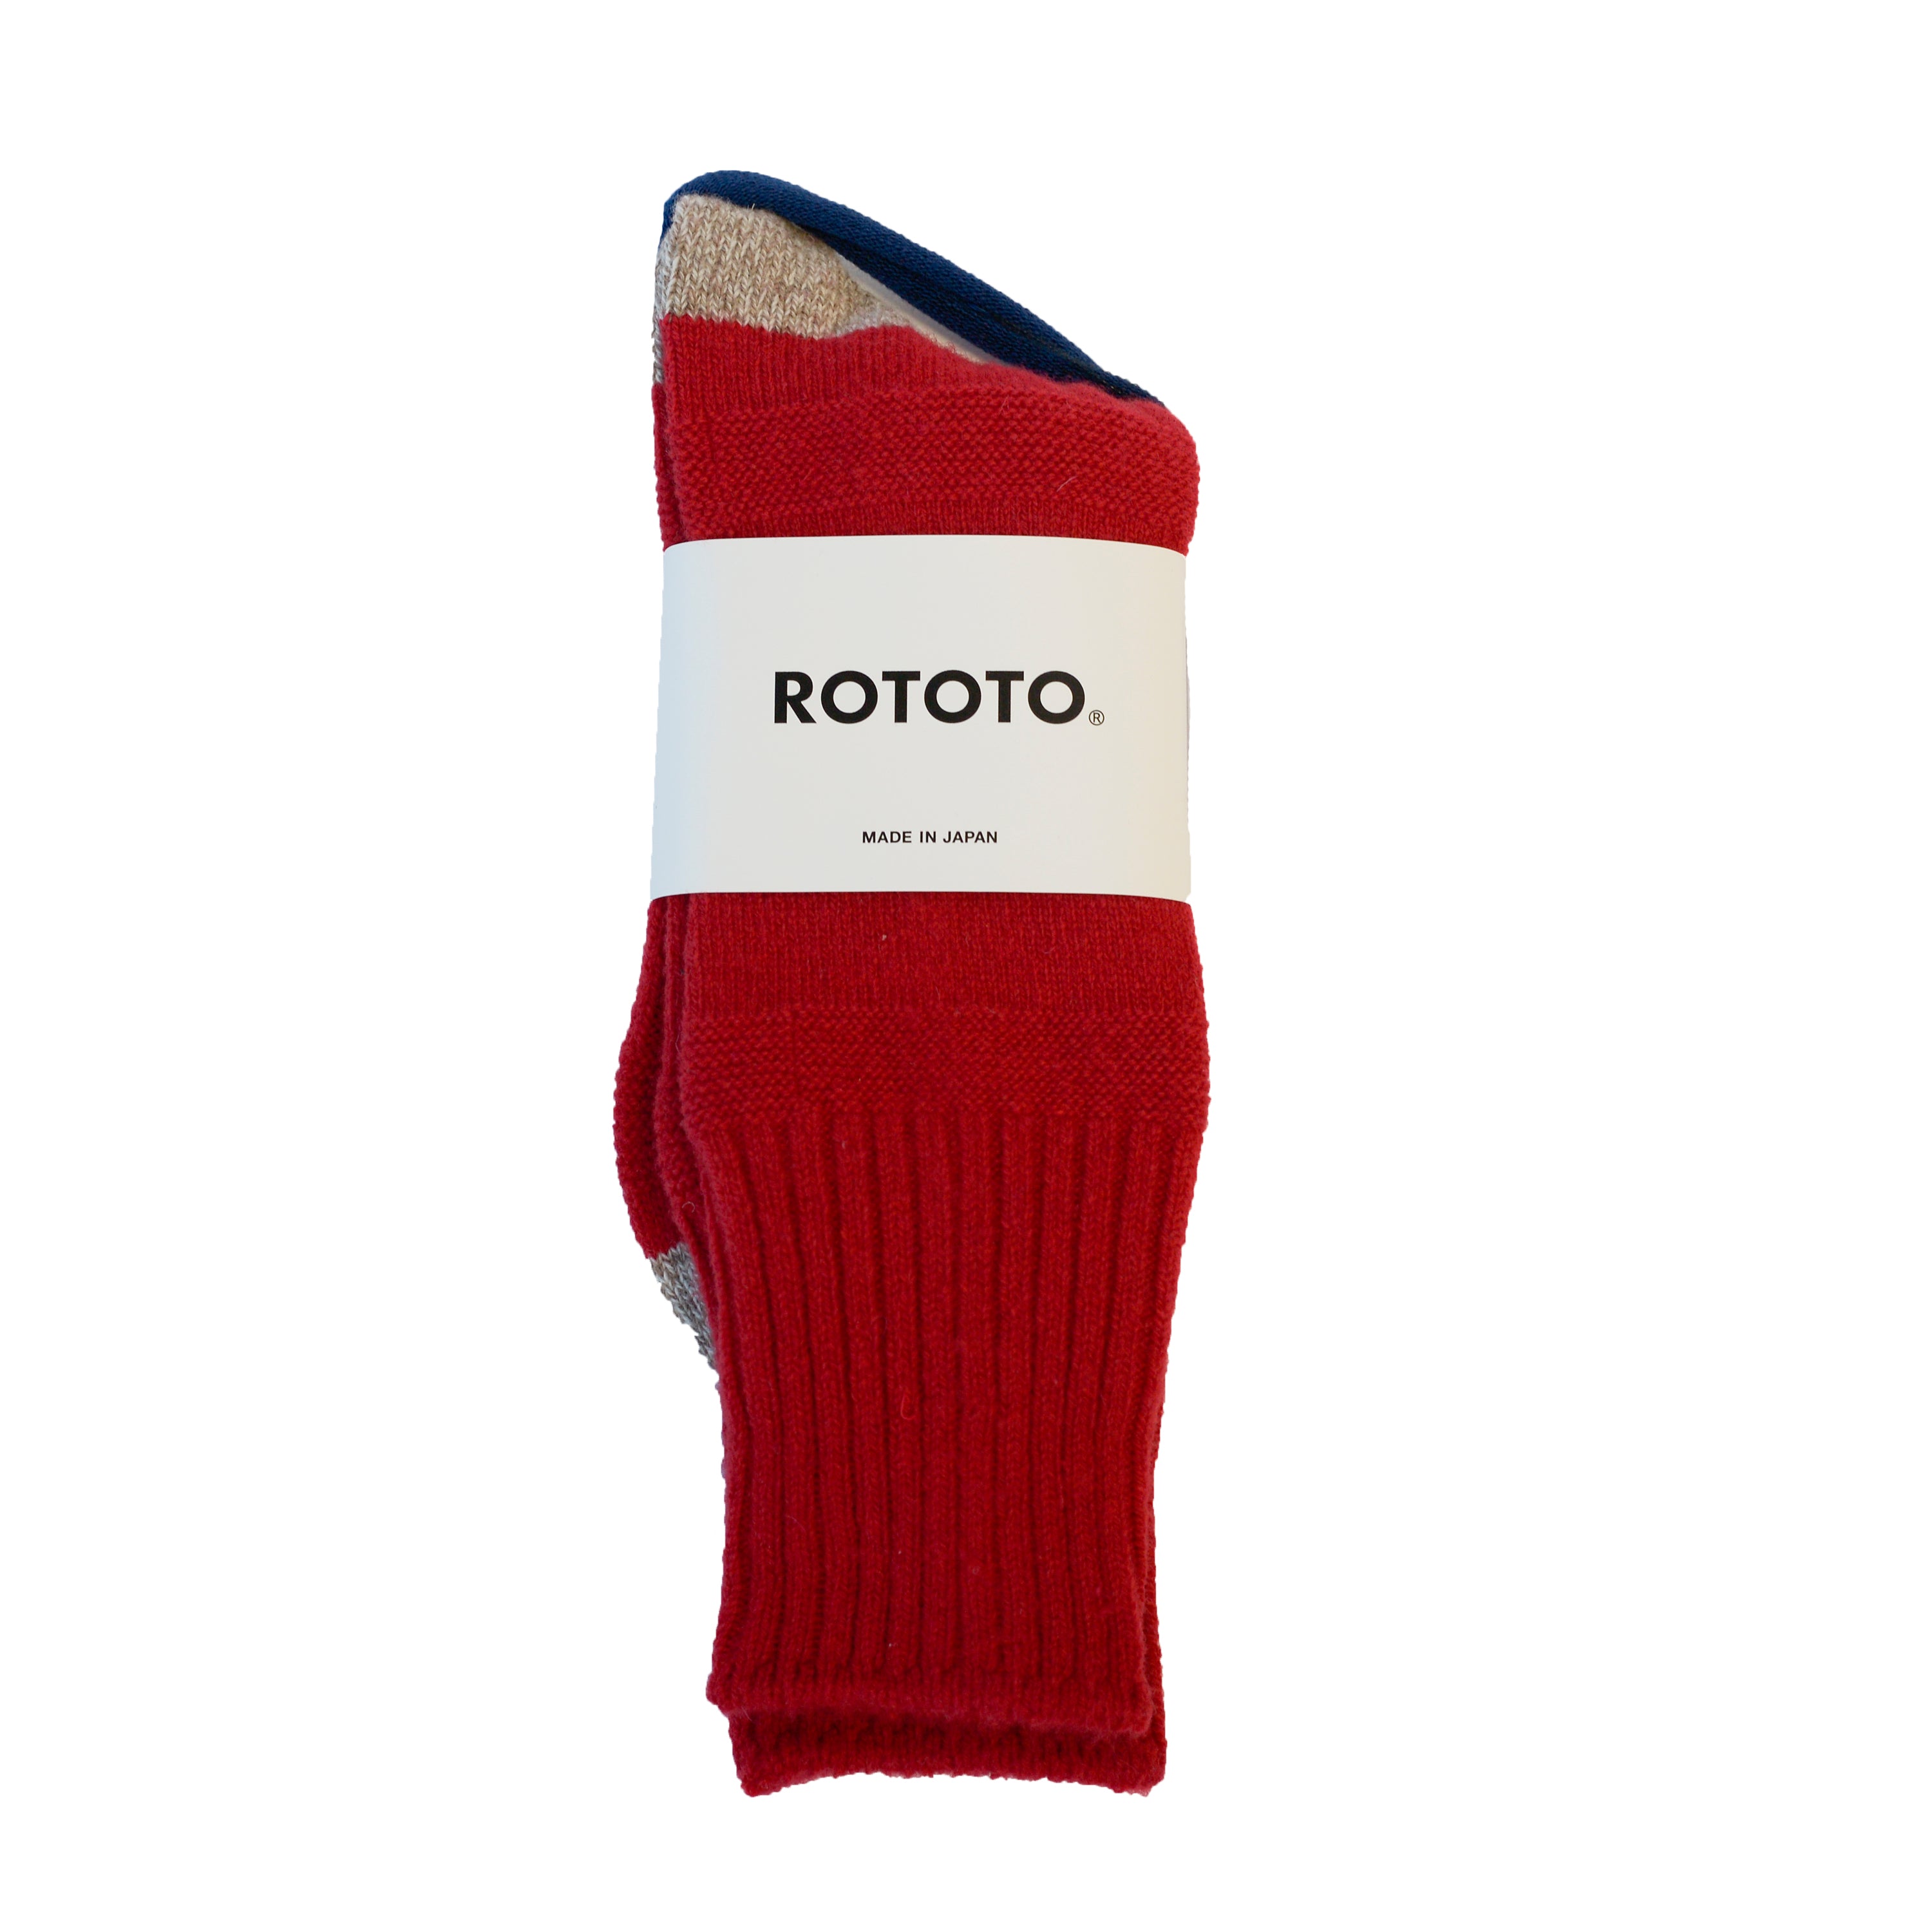 RoToTo Guernsey Pattern Crew Socks Red/Mix Brown – The Foxhole